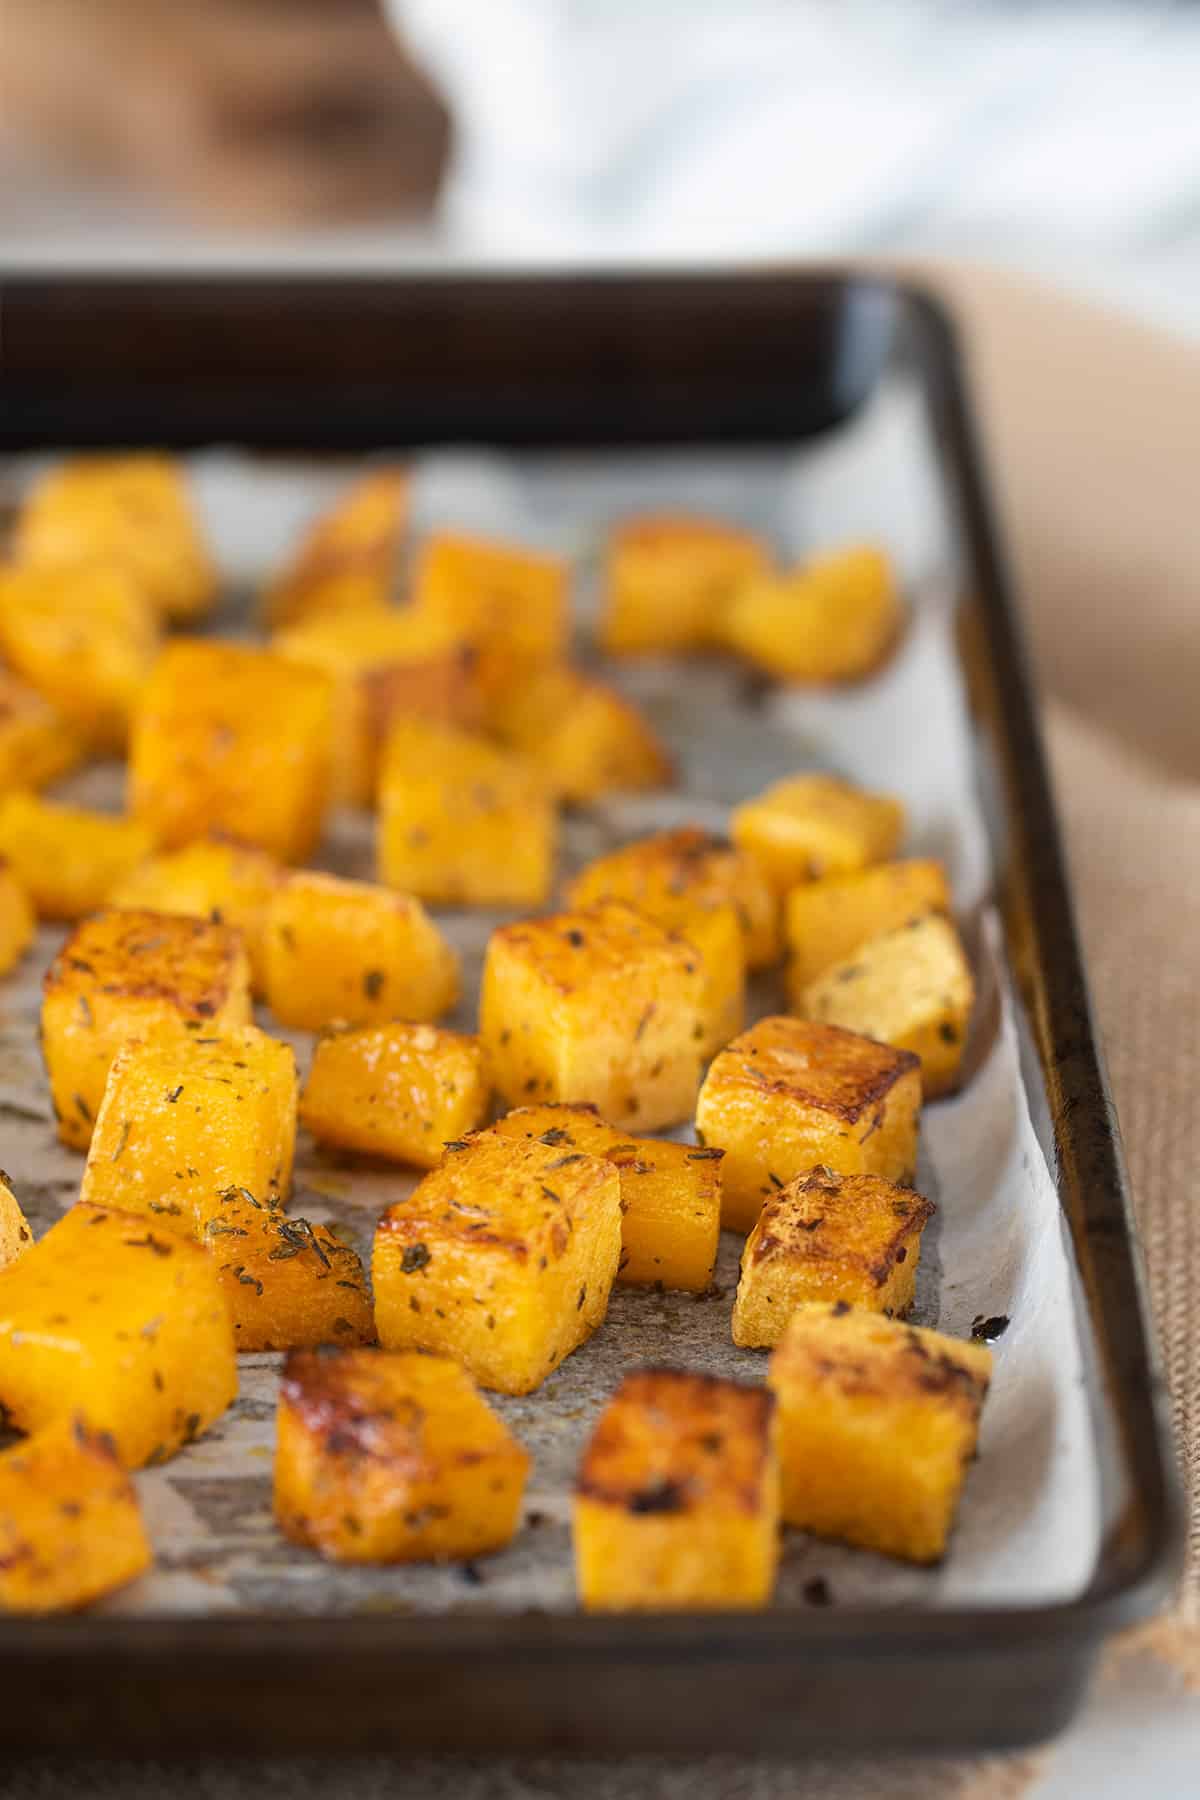 Cubed roasted butternut squash on a dark sheetpan.